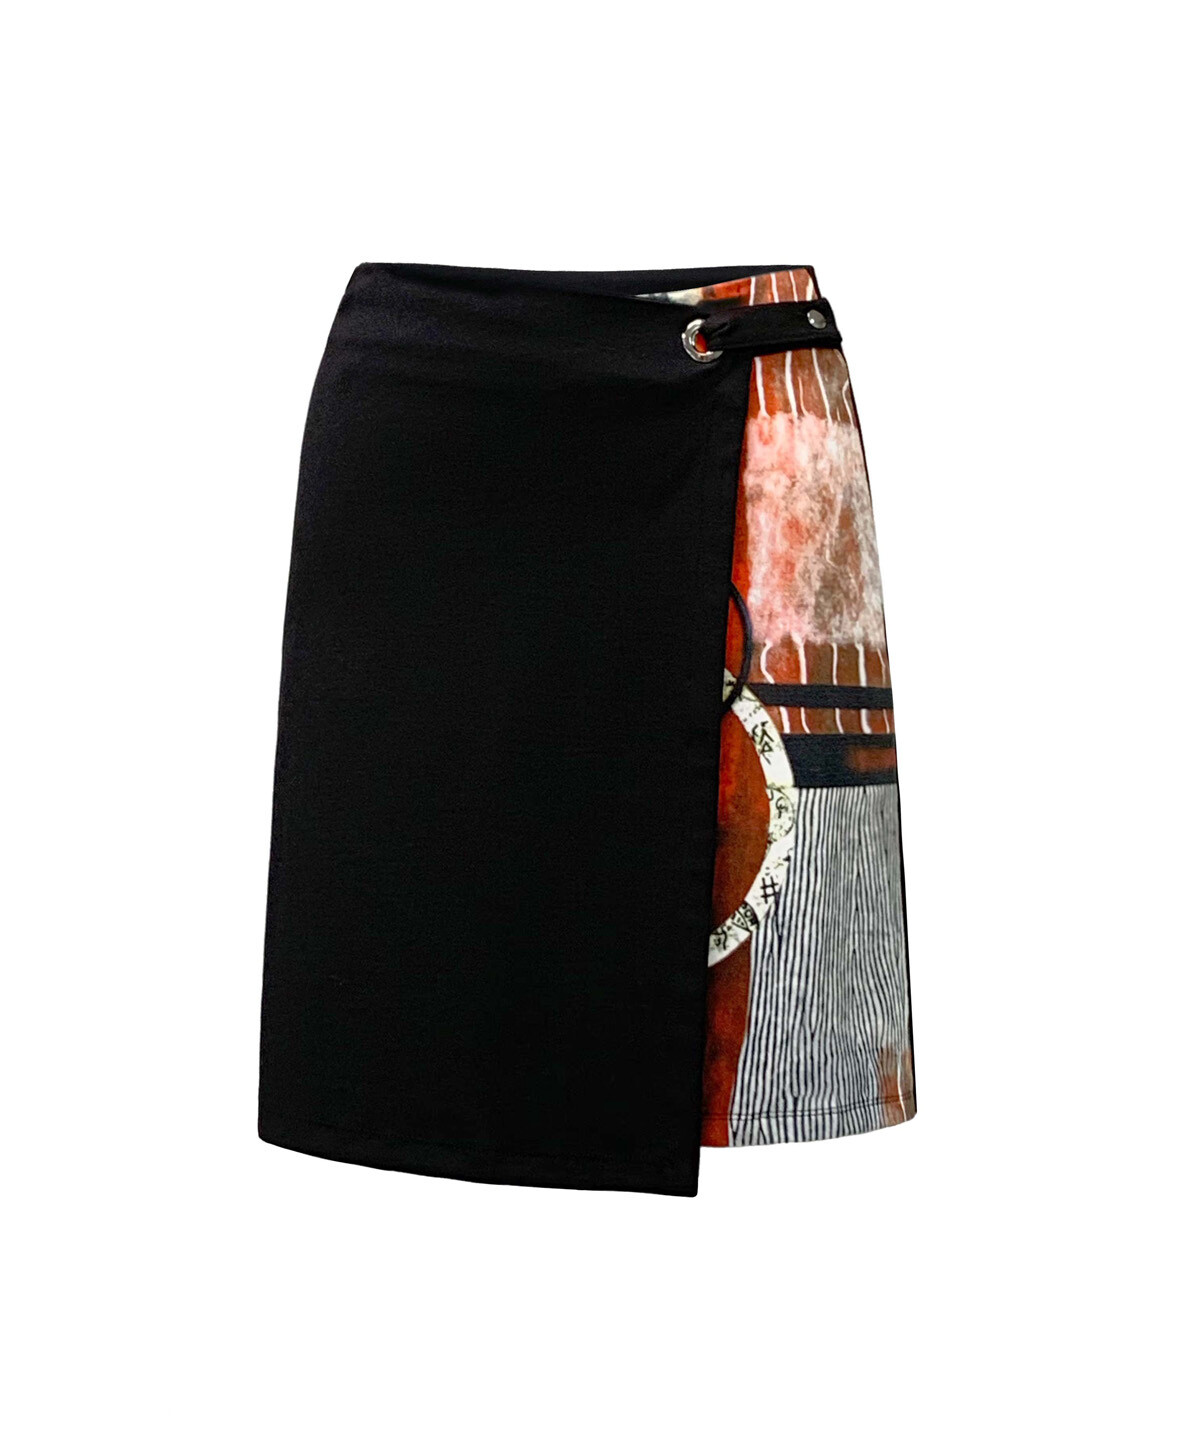 Simply Art Dolcezza: Pretty In Red Extraordinary Abstract Art Crossover Skirt SOLD OUT